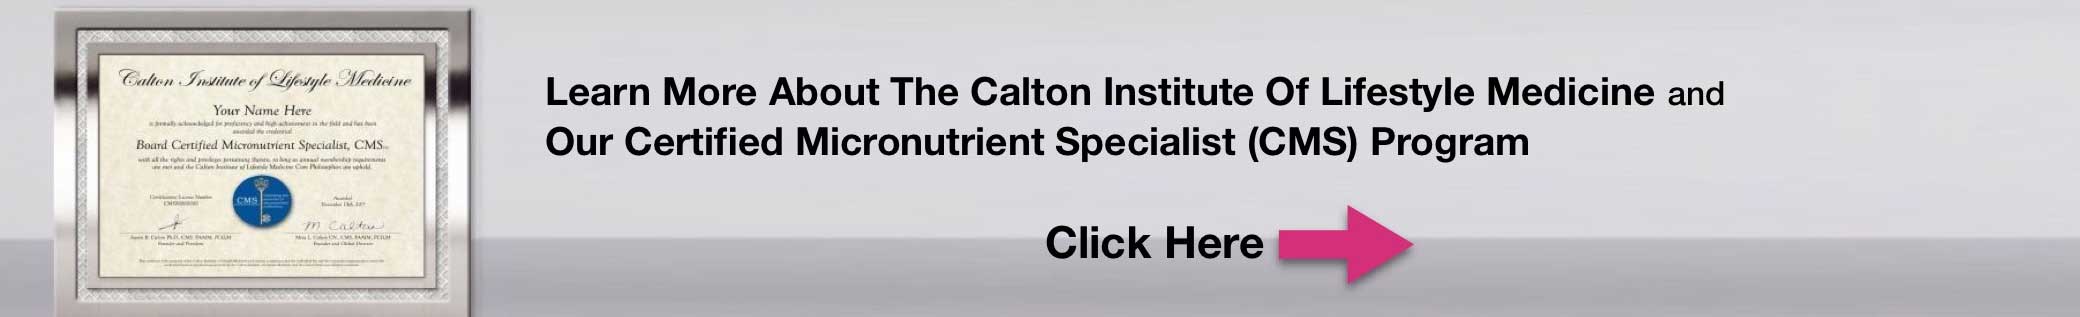 Learn more about the Calton Institute Of Lifestyle Medicine and Our Certified Micronutrient Specialist CMS Program